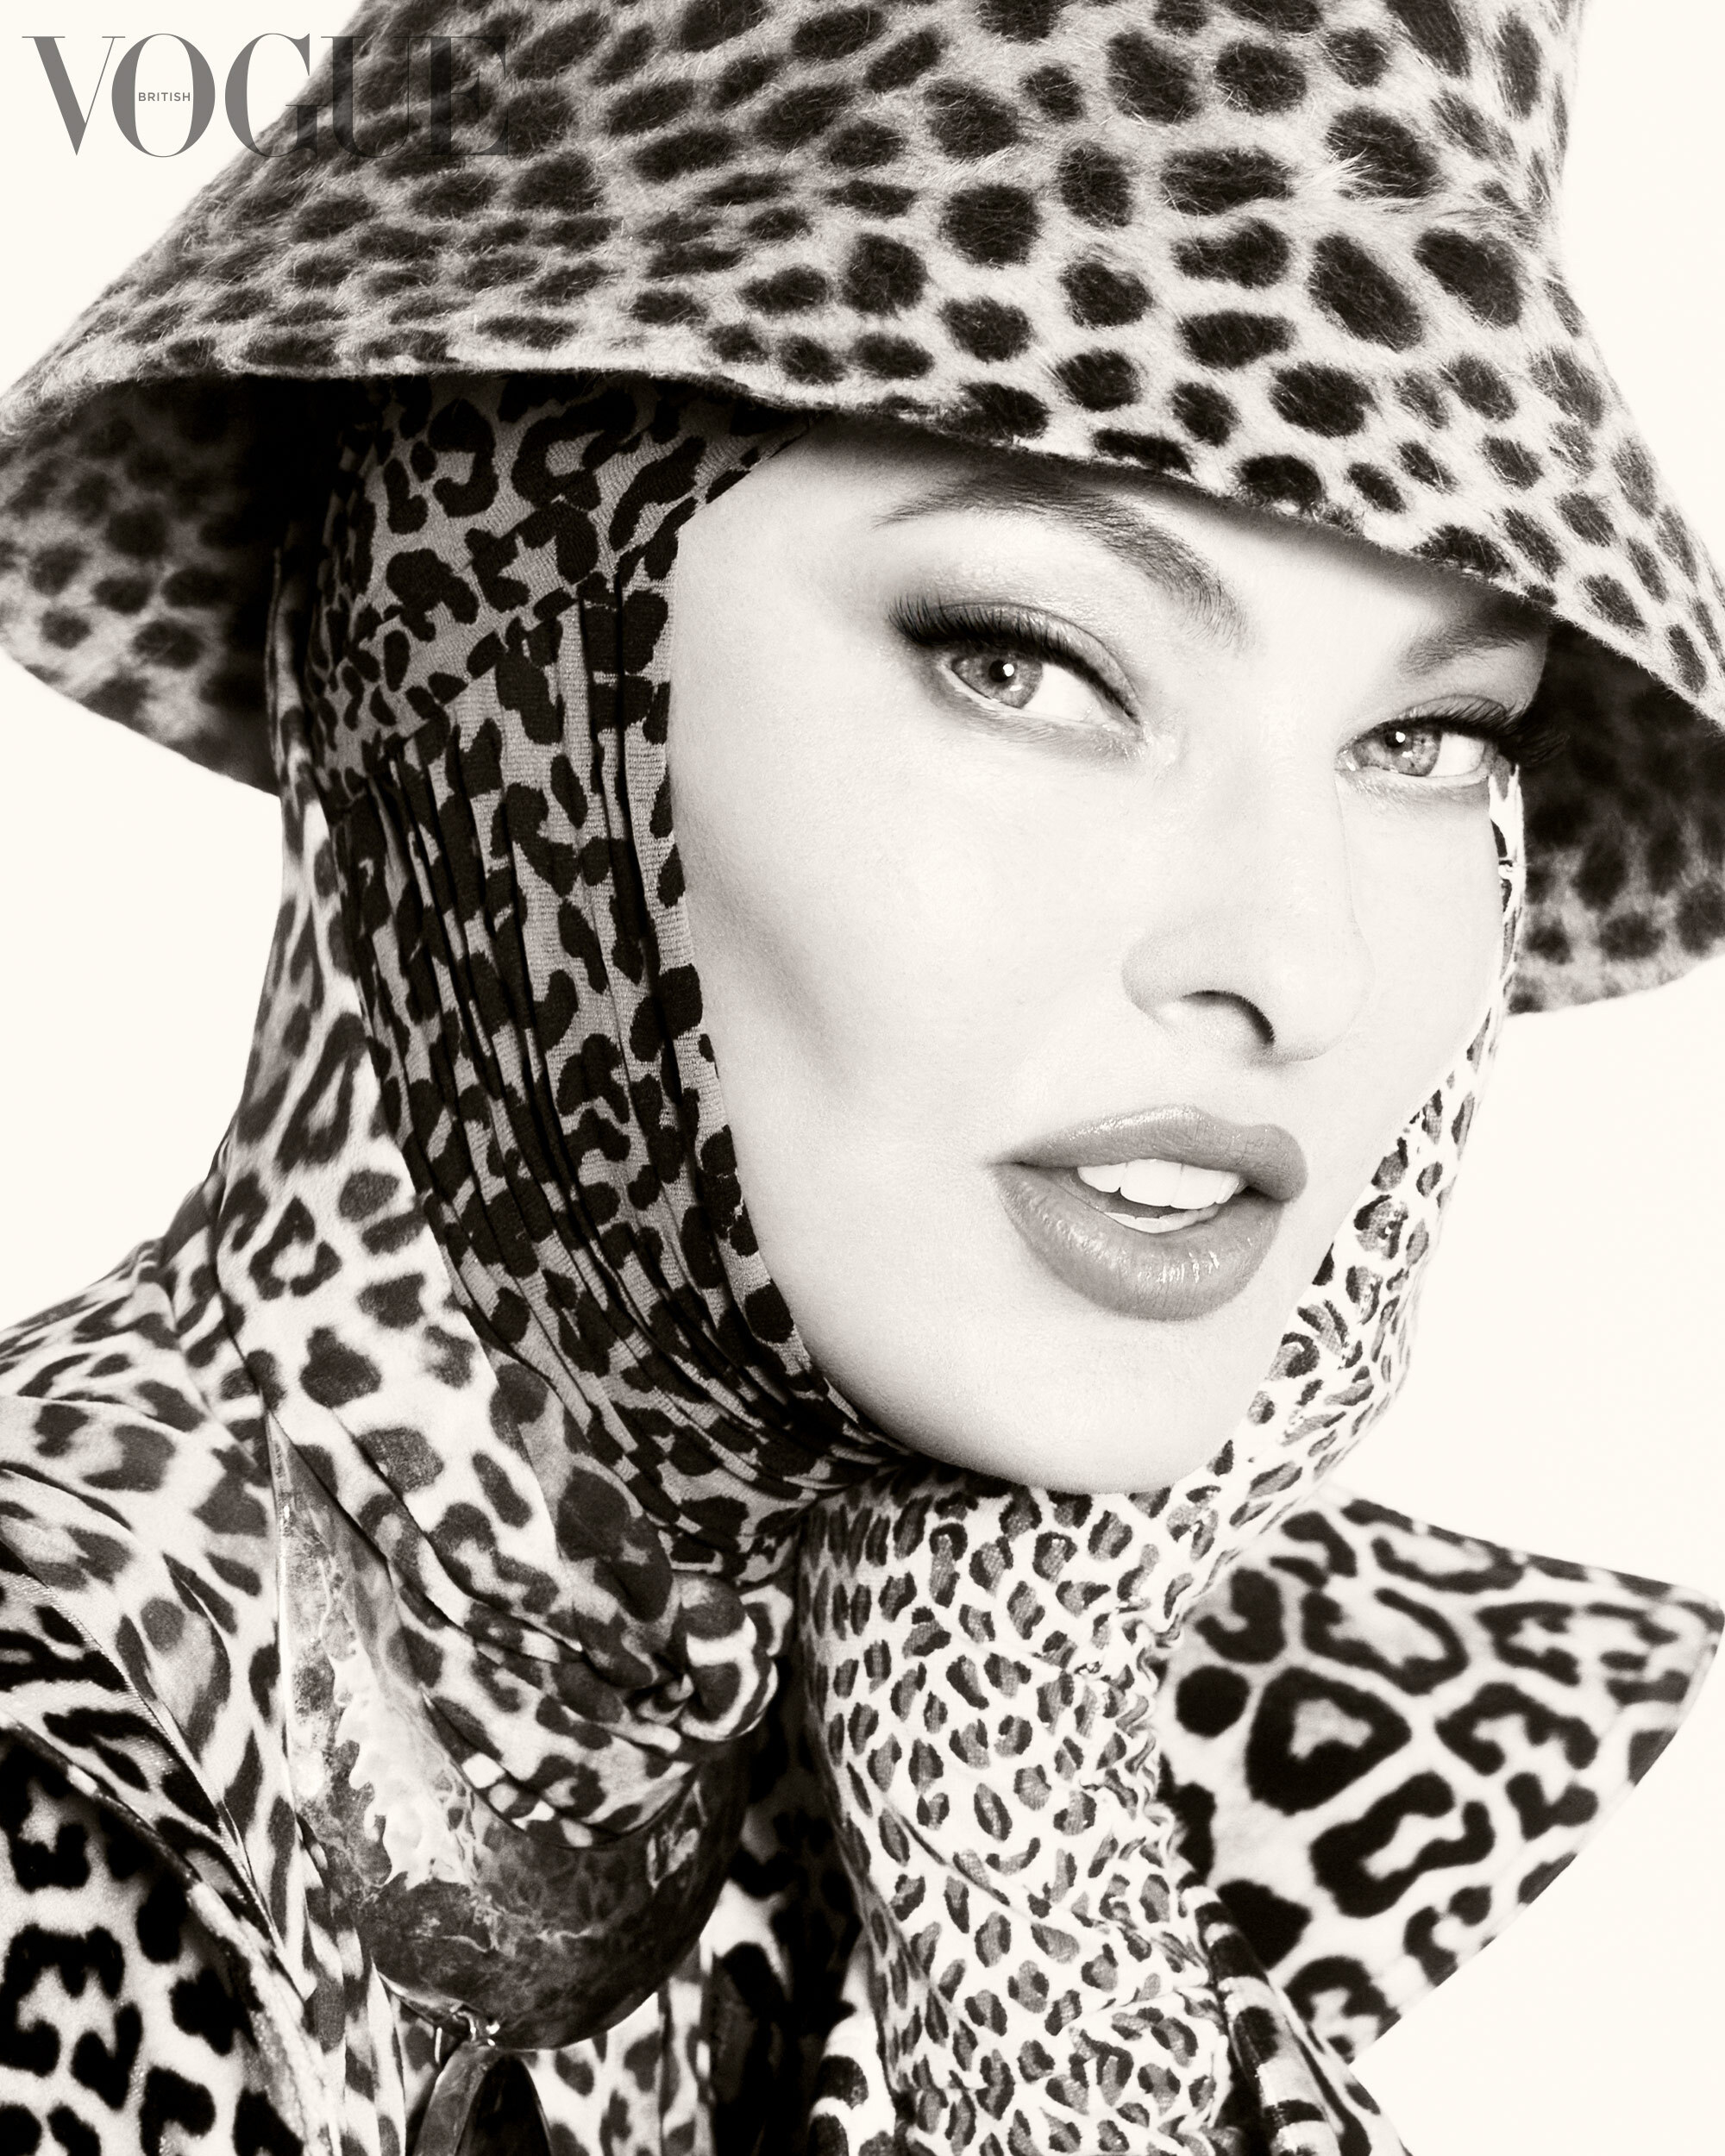 Linda wearing animal print hat, scarf, and jacket in Vogue spread